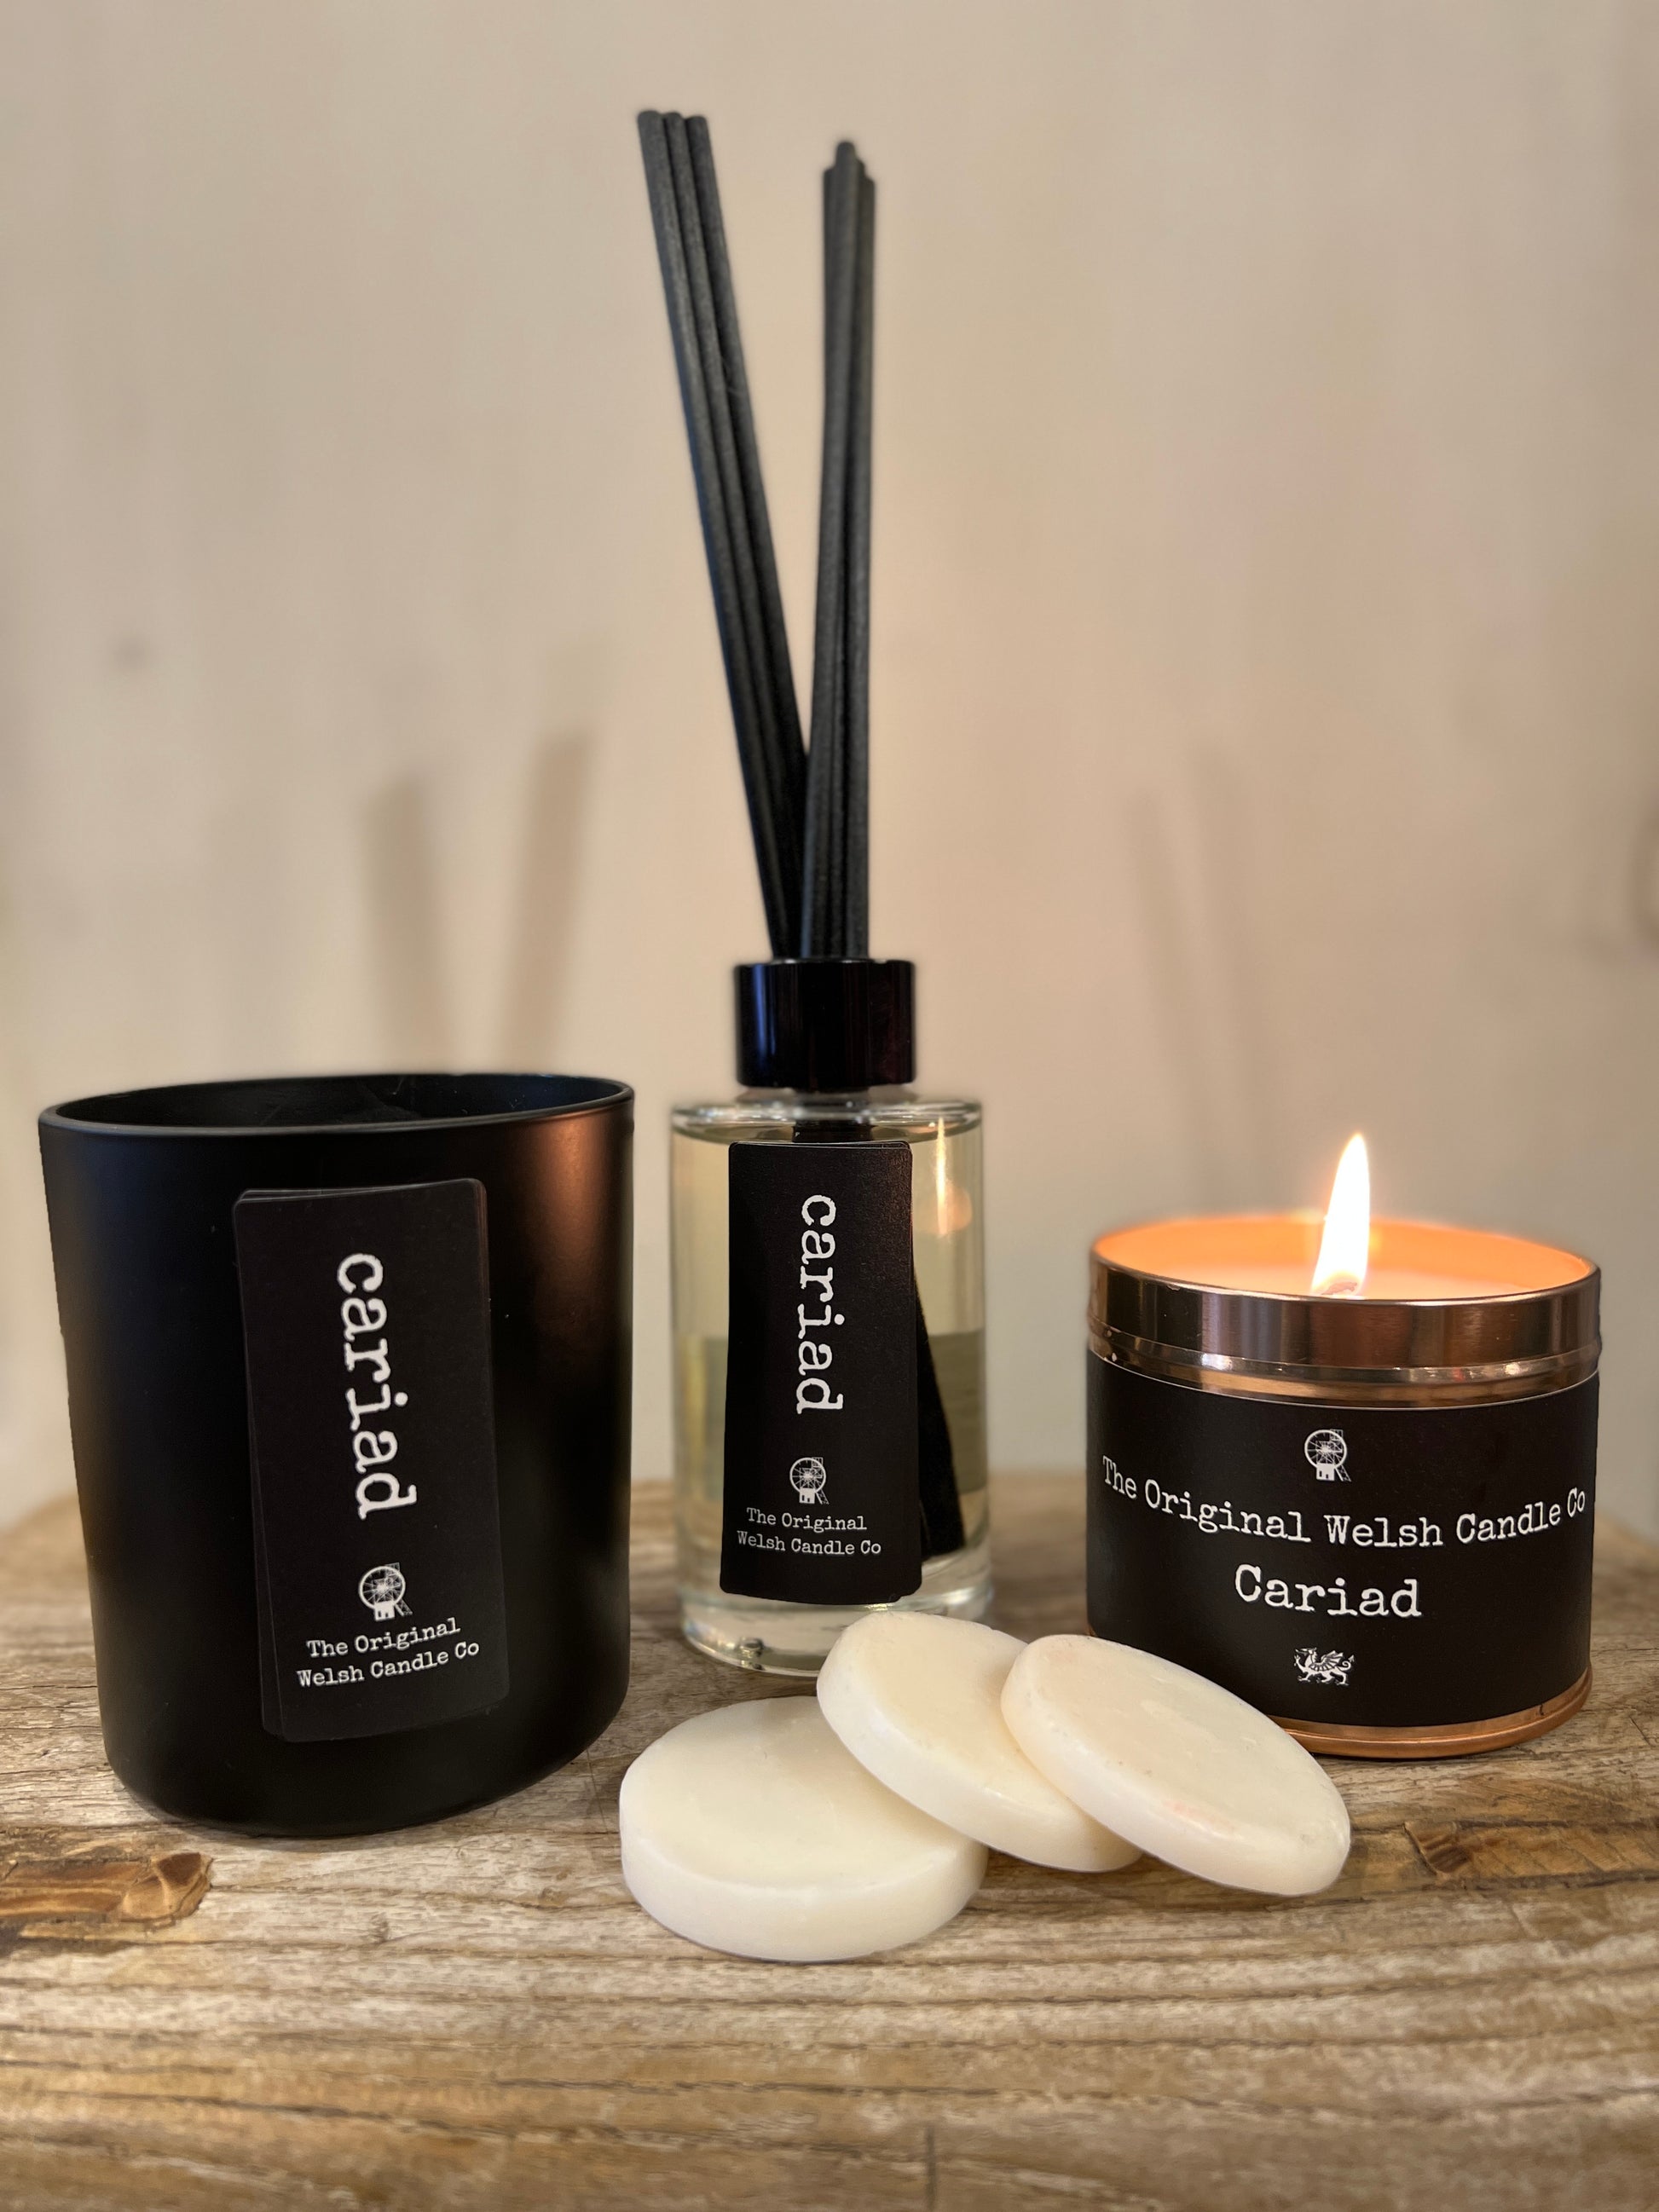 a gift box containing a glass reed diffuser, a matt black glass candle a copper tin candle and a pack of wax melts all scented with black pomegranate all labelled cariad